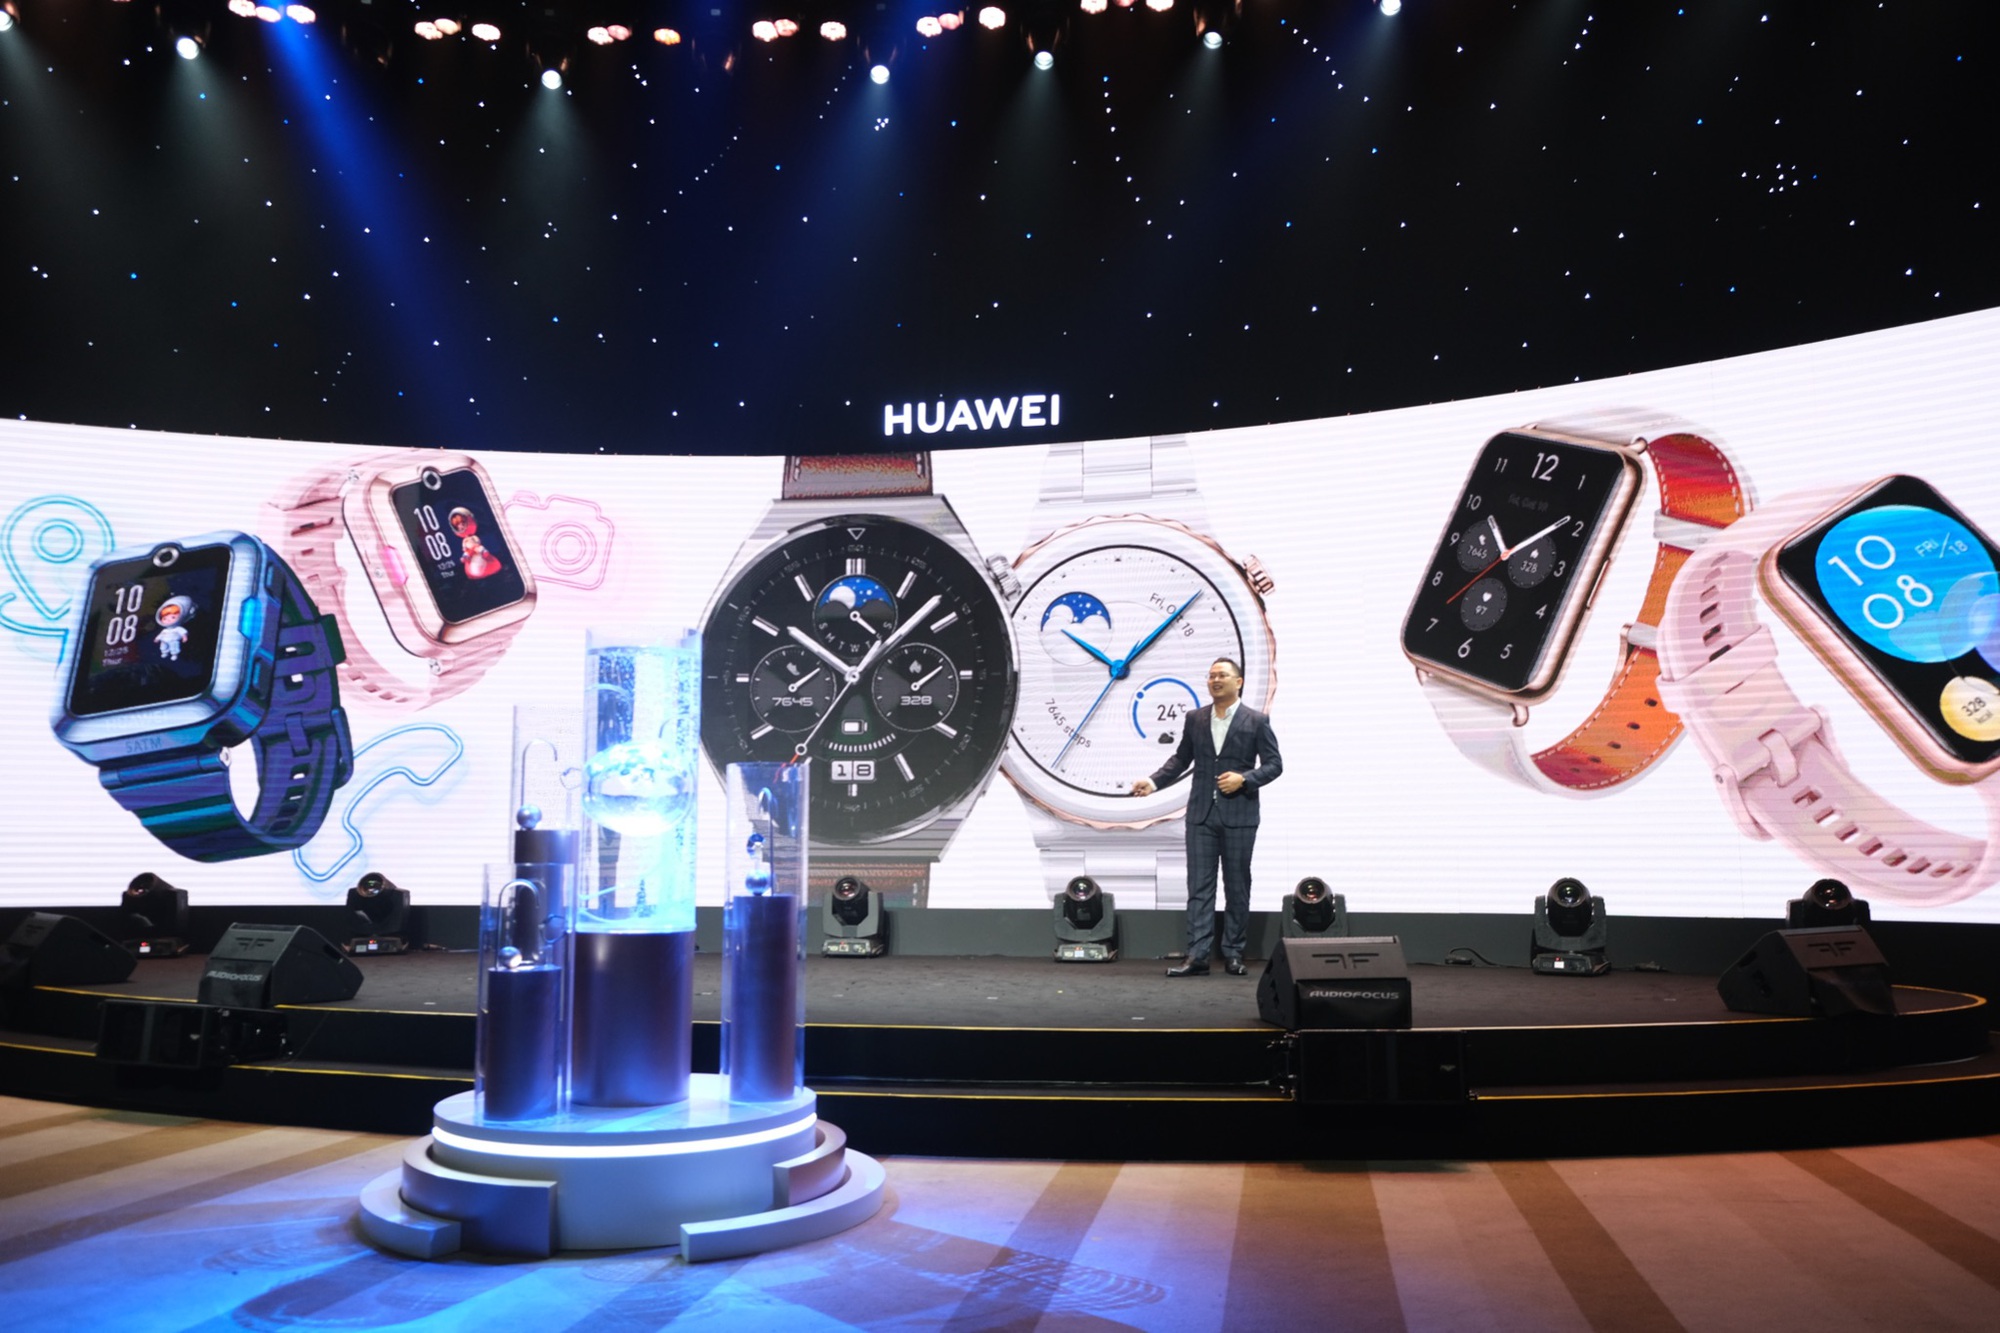 Bao Anh, Trong Hieu shined at the launch event of 3 new Huawei smartwatch models - Photo 1.